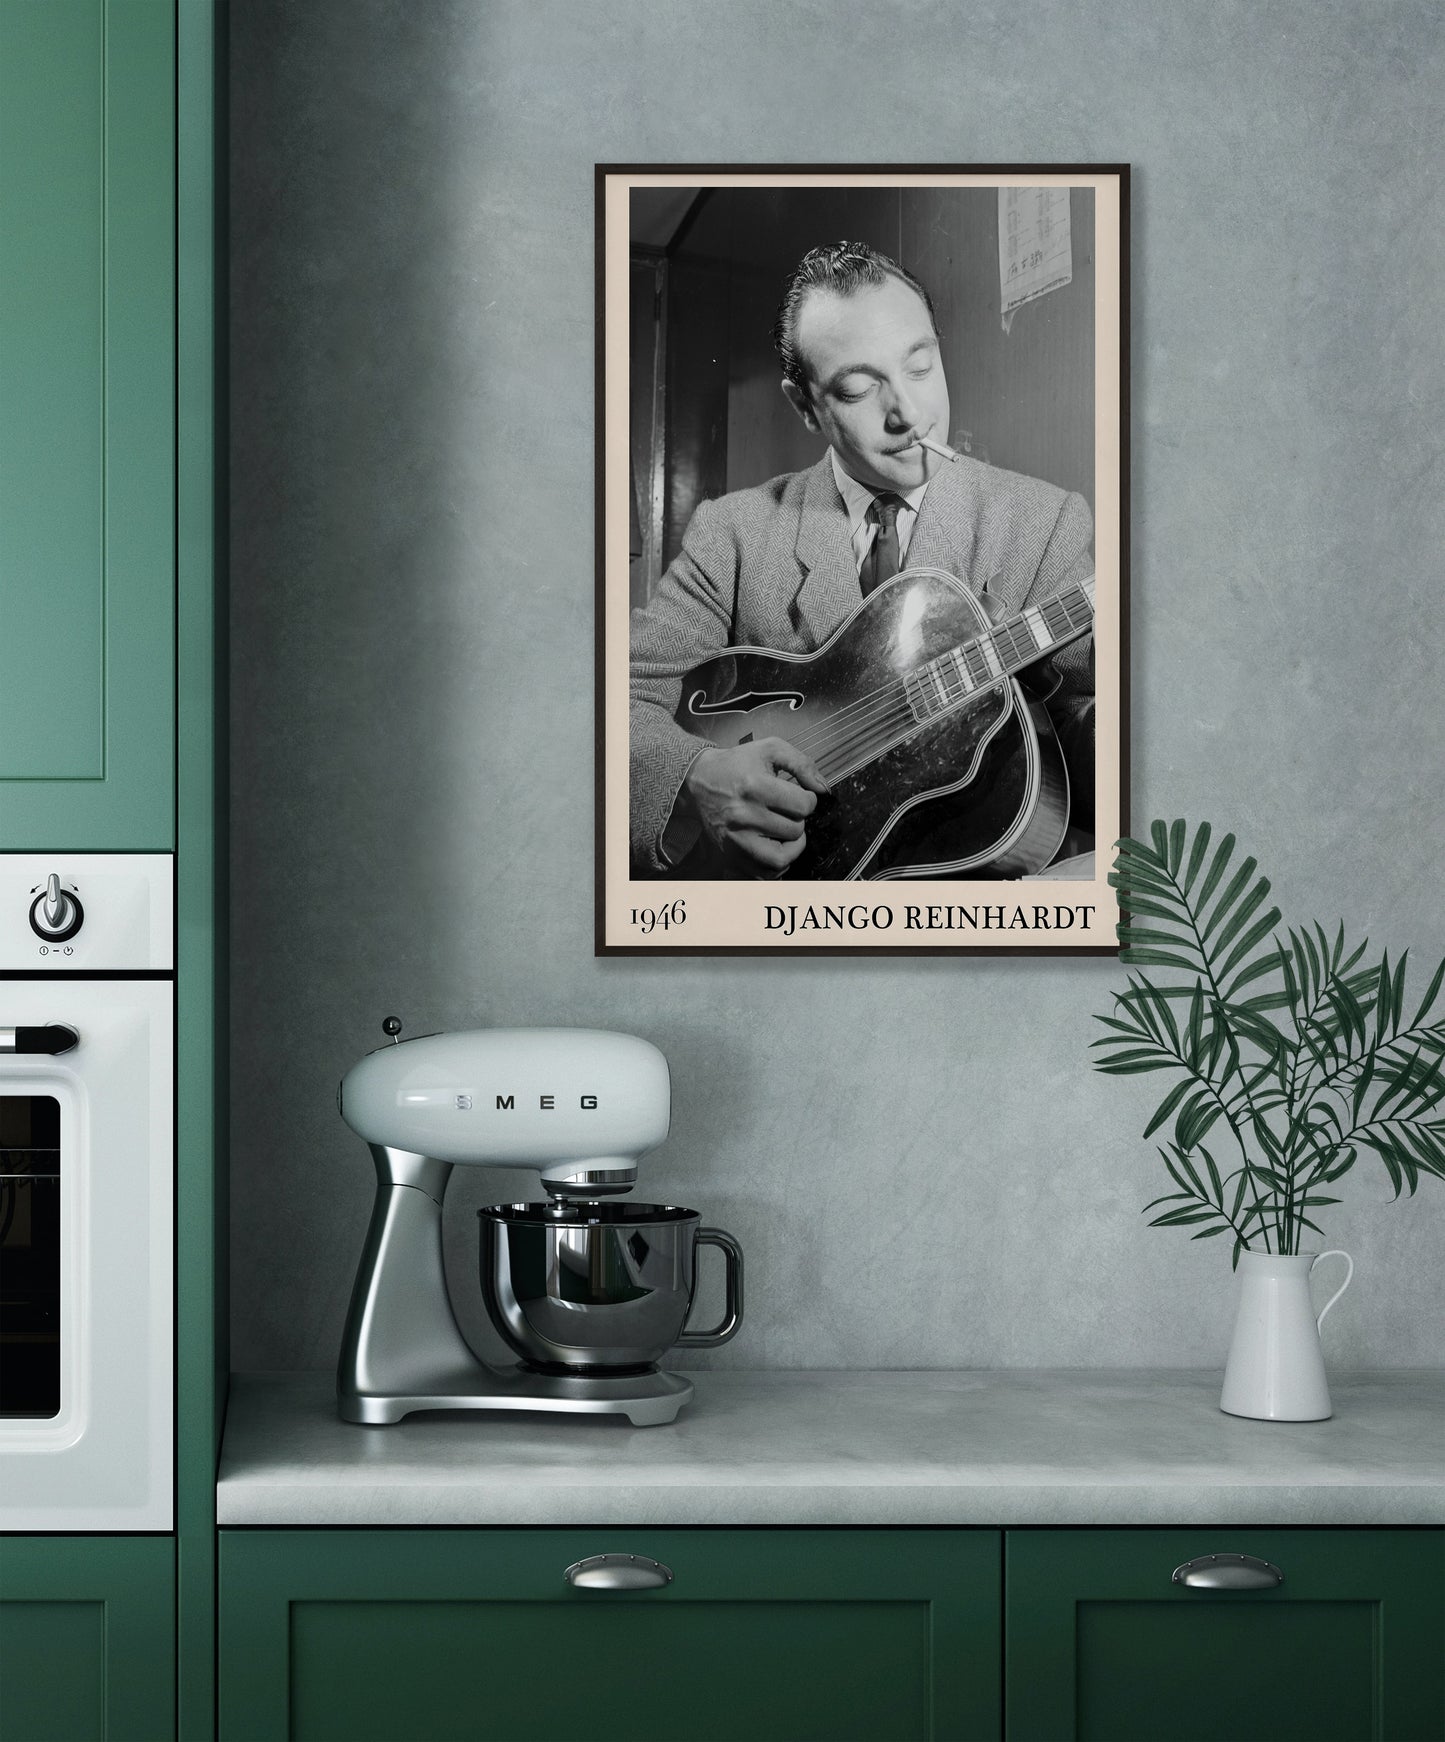 1946 photograph of Django Reinhardt playing the guitar. Transformed into a cool black-framed jazz poster hanging on a grey kitchen wall